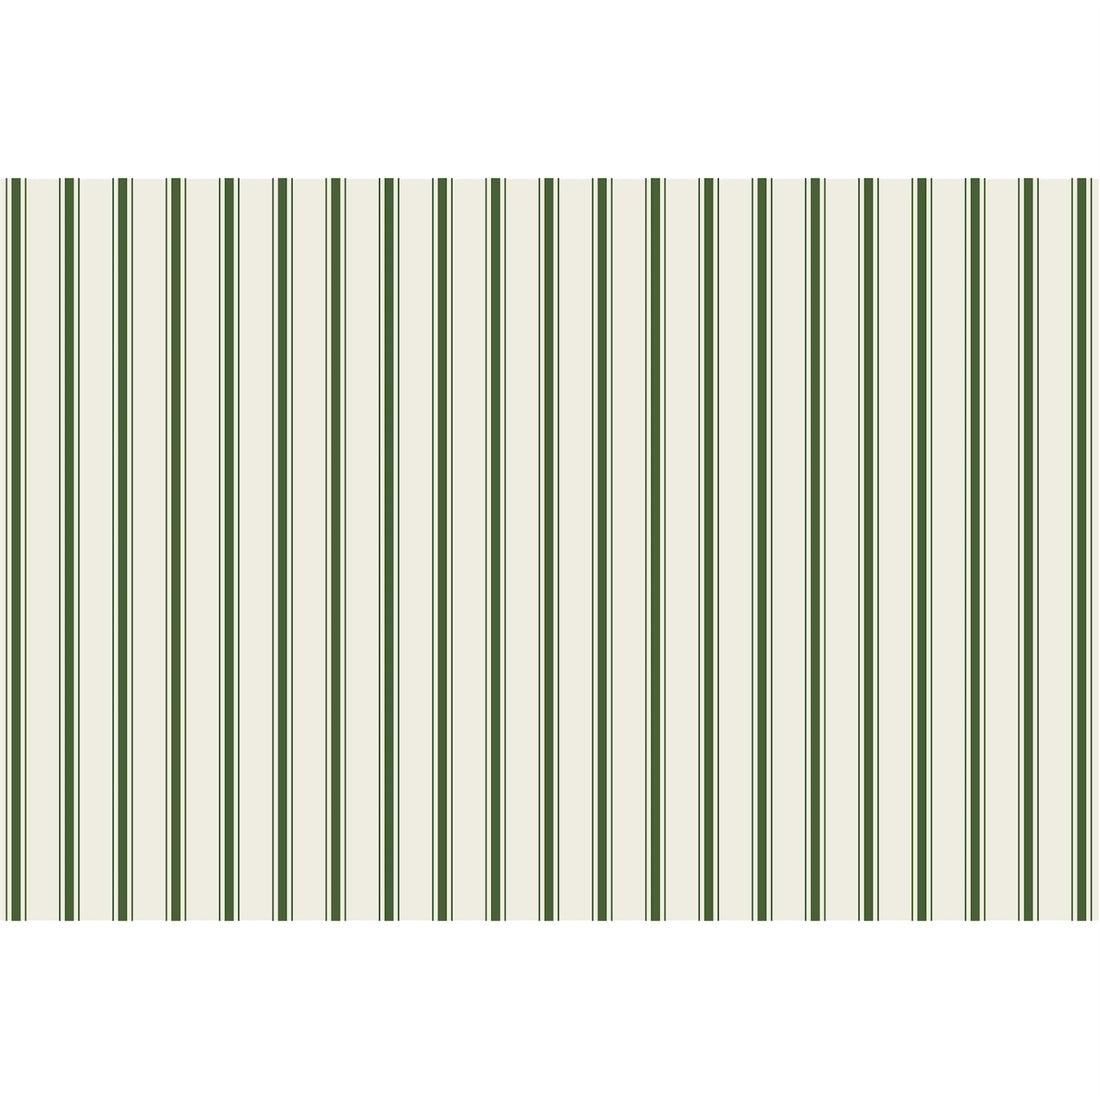 Vertical, evenly spaced dark green lines in a thin-thick-thin pattern over a white background.